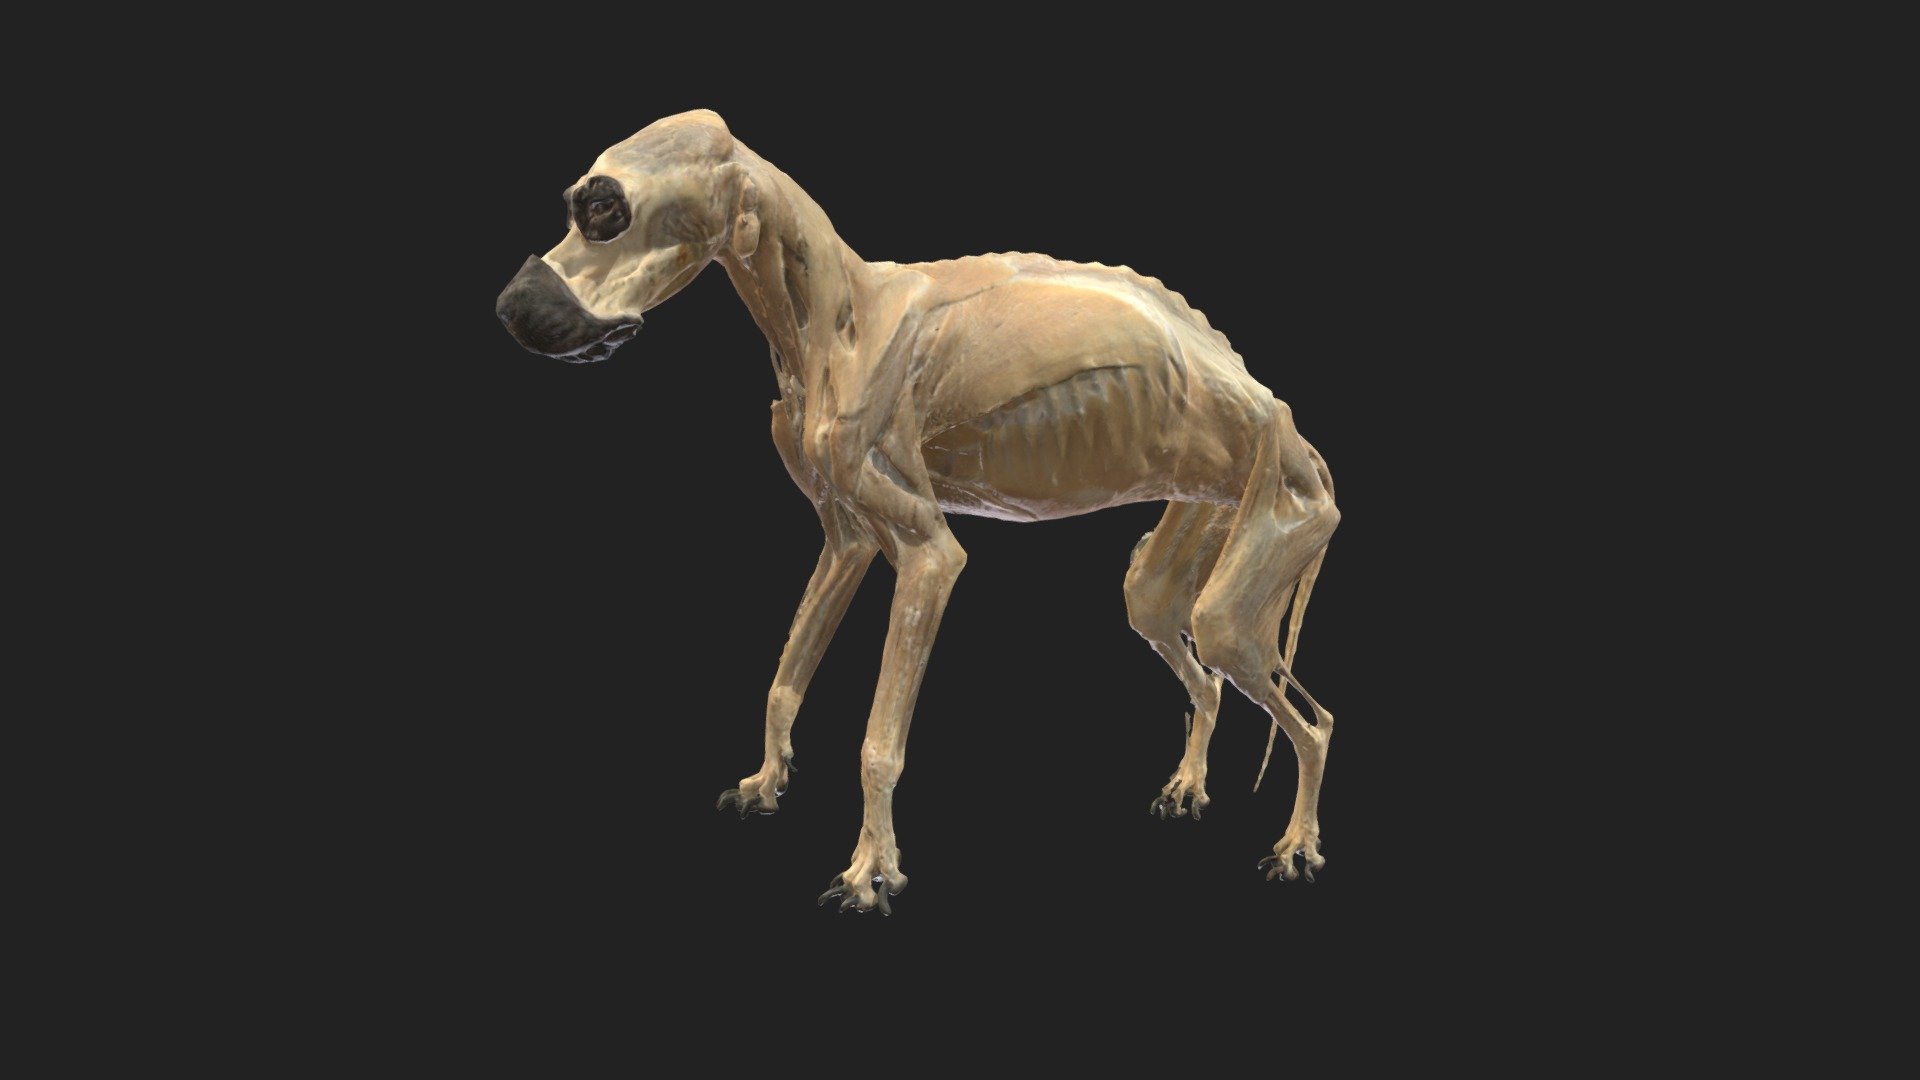 a complete presentation of a dog

size of specimen: 719.9 x 443.2 x 131mm

3D scanning performed with the structured light scanners &ldquo;Artec Leo